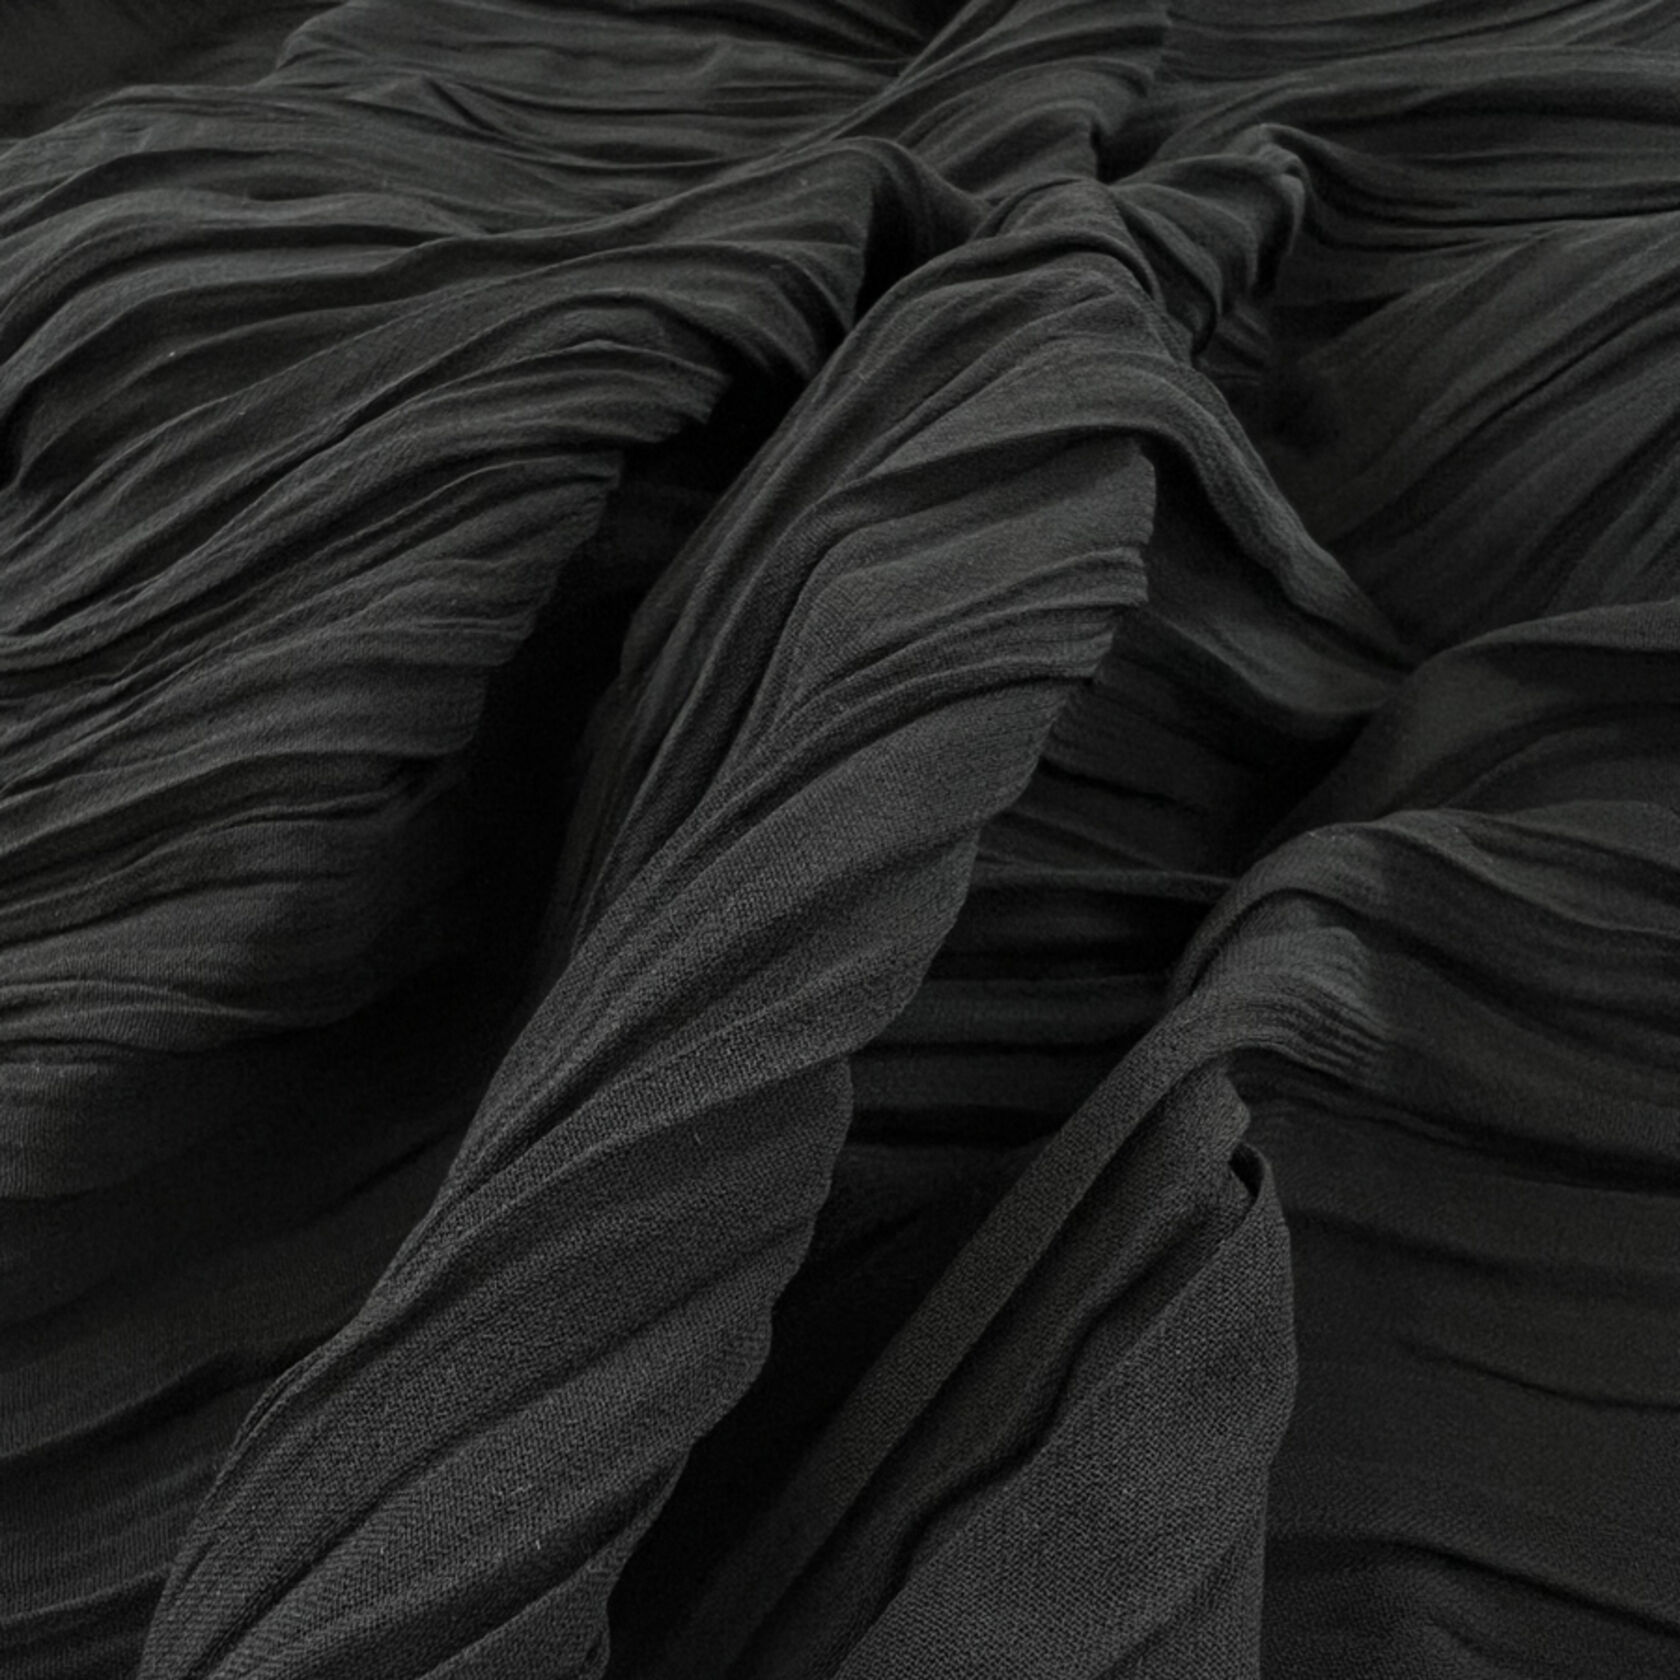 Black Jacquard Fabric, 3D Creases Fold Fabric, Pleated Texture Dust Coat  Fabric, Wrinkled Dress Fabric, Designer Fabric, by the Meter, D105 